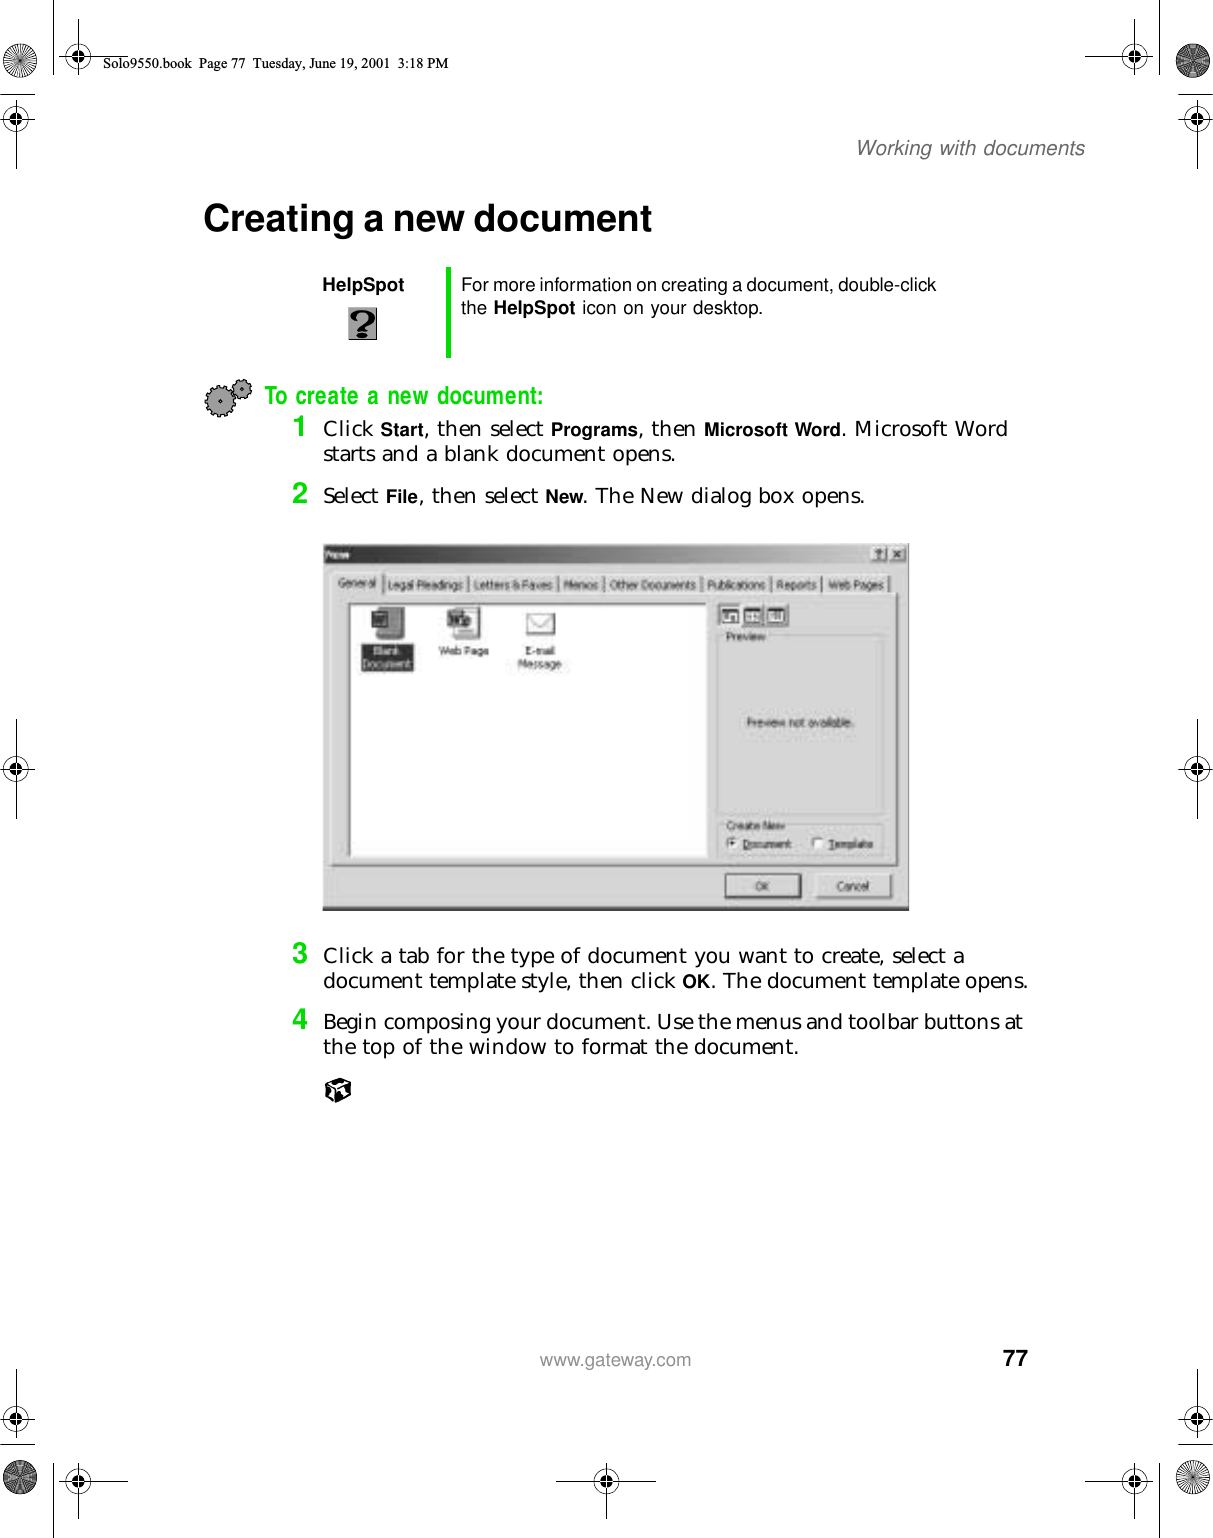 77Working with documentswww.gateway.comCreating a new documentTo create a new document:1Click Start, then select Programs, then Microsoft Word. Microsoft Word starts and a blank document opens.2Select File, then select New. The New dialog box opens.3Click a tab for the type of document you want to create, select a document template style, then click OK. The document template opens.4Begin composing your document. Use the menus and toolbar buttons at the top of the window to format the document.HelpSpot For more information on creating a document, double-click the HelpSpot icon on your desktop.Solo9550.book Page 77 Tuesday, June 19, 2001 3:18 PM